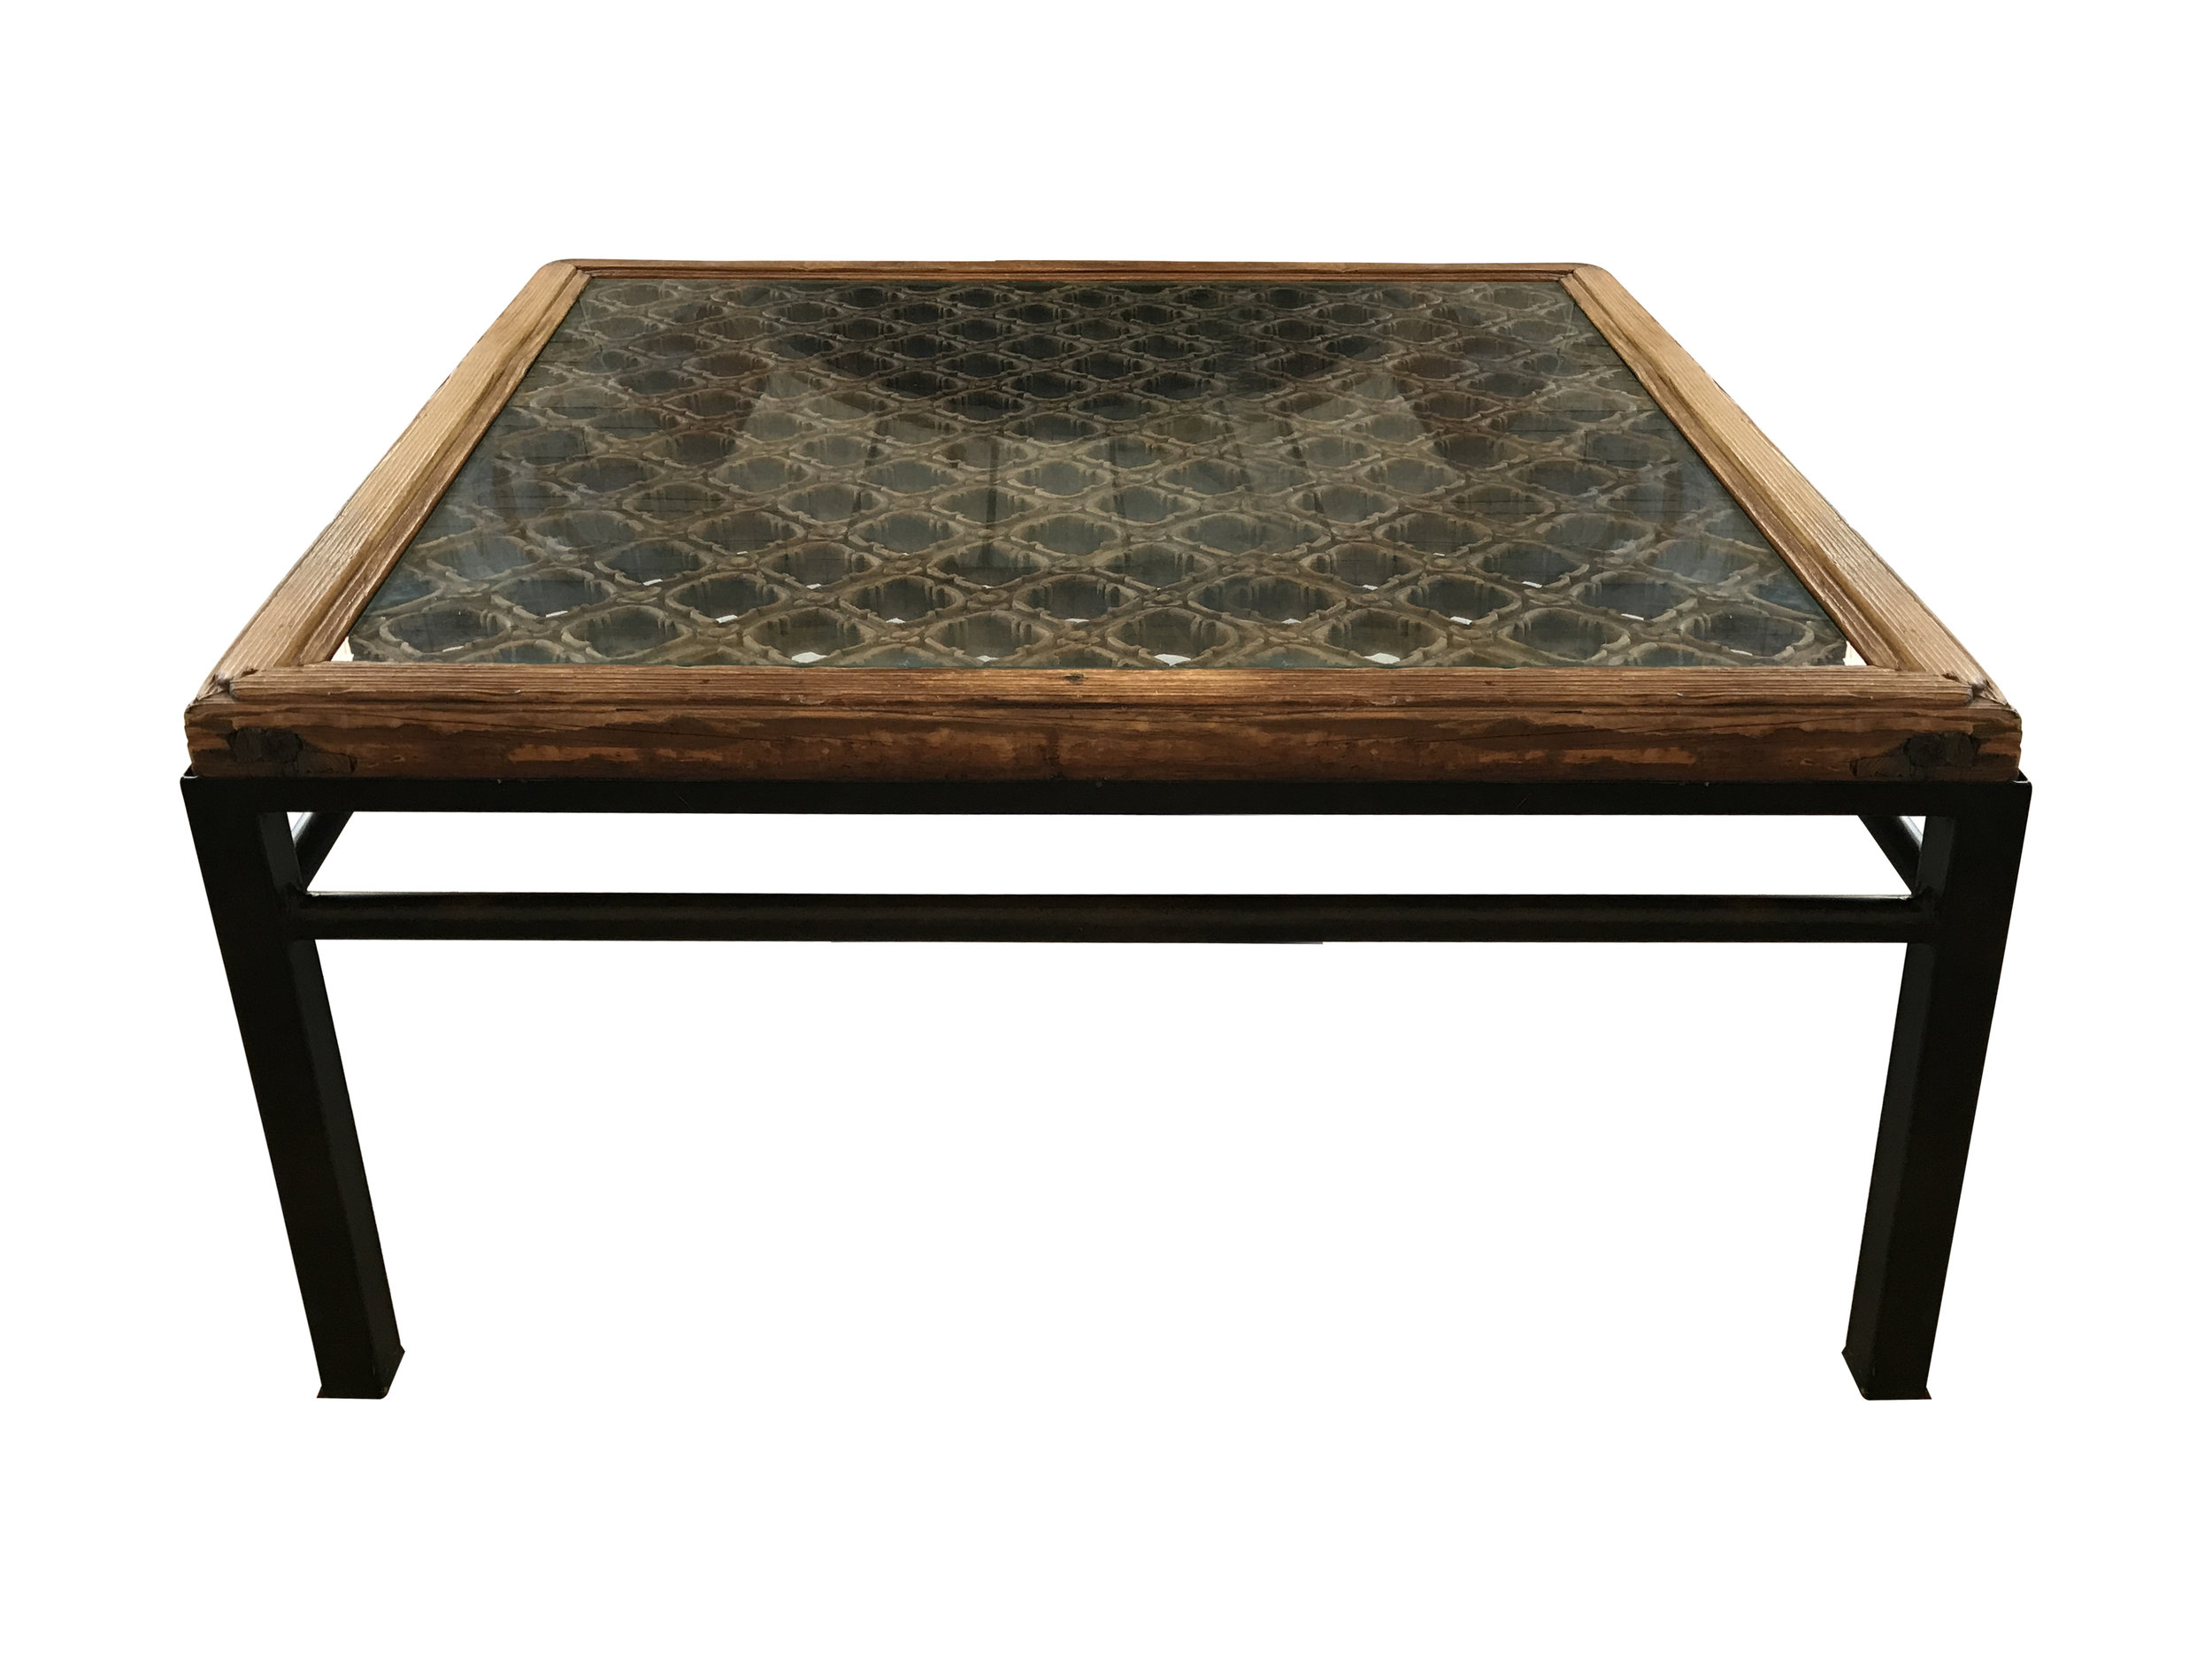  The core of this coffee table is an antique Chinese screen. 